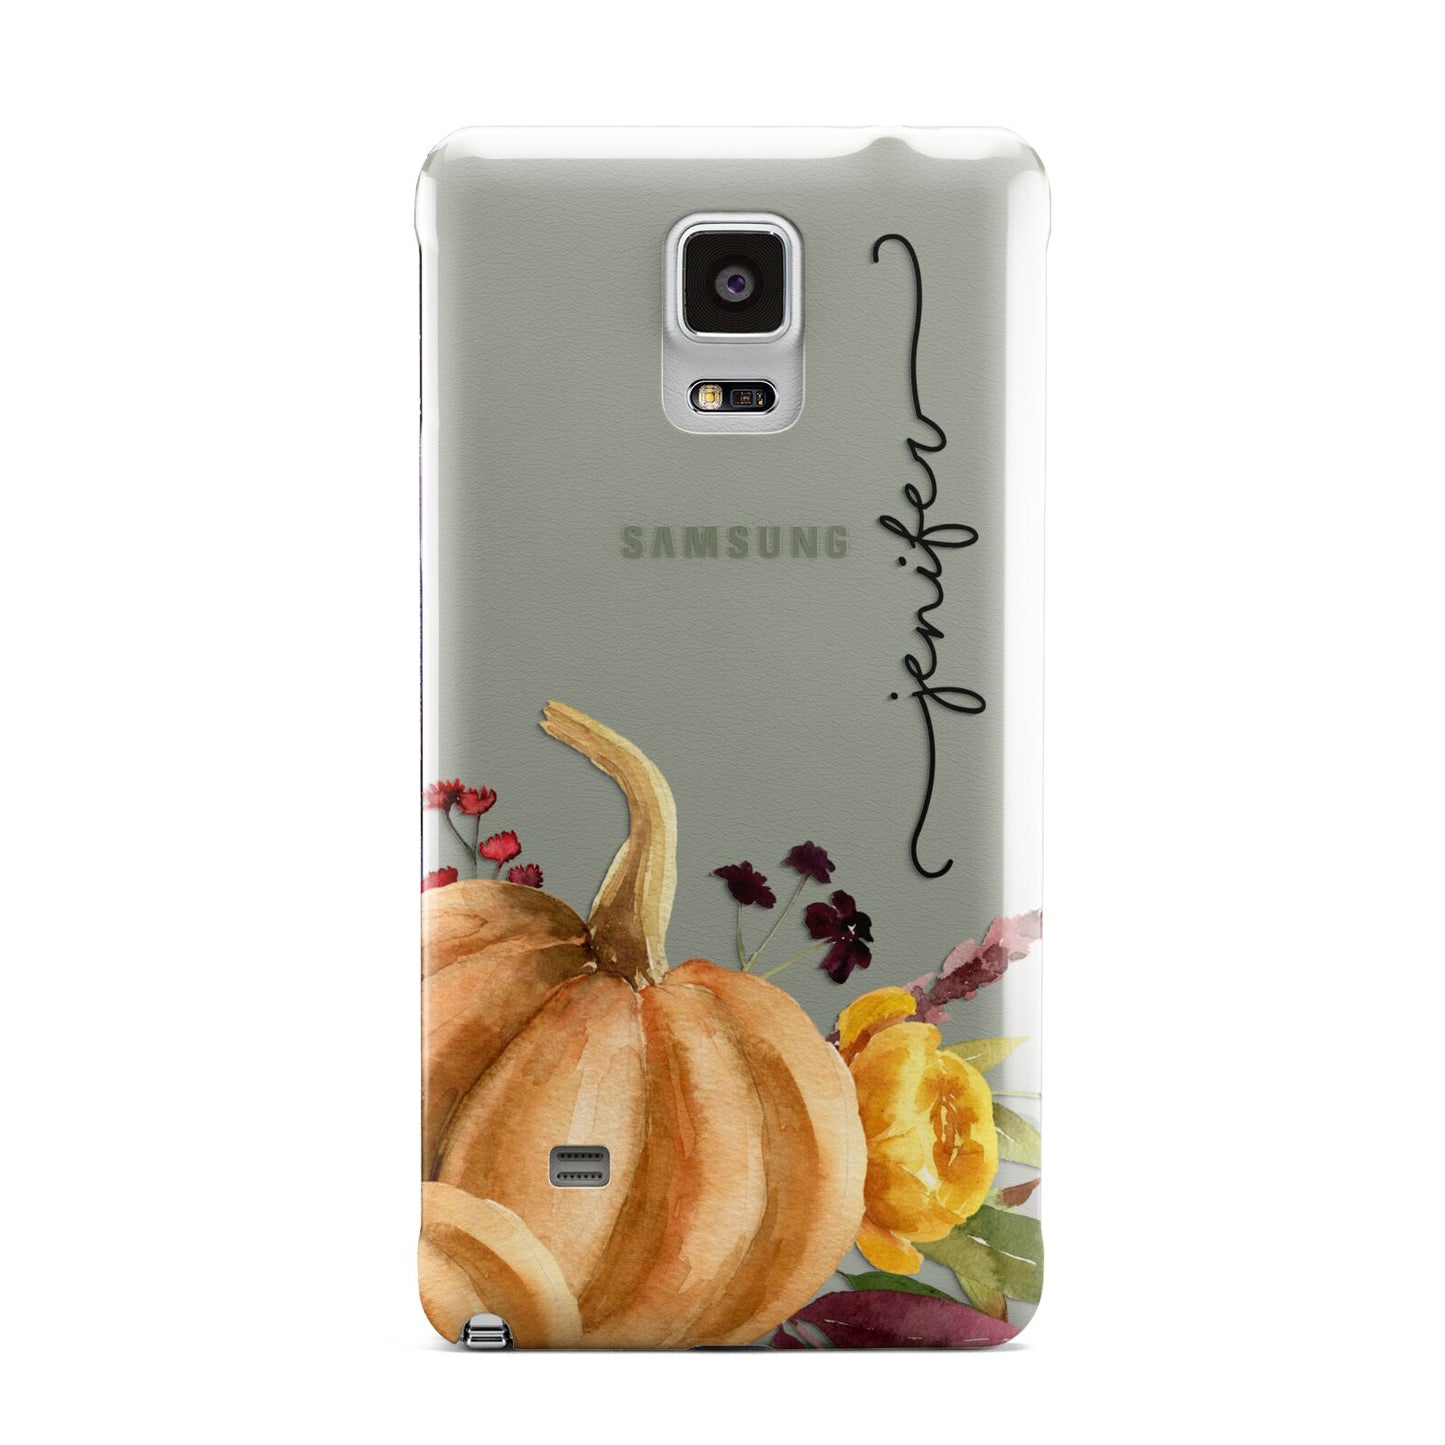 Watercolour Pumpkins with Black Vertical Text Samsung Galaxy Note 4 Case